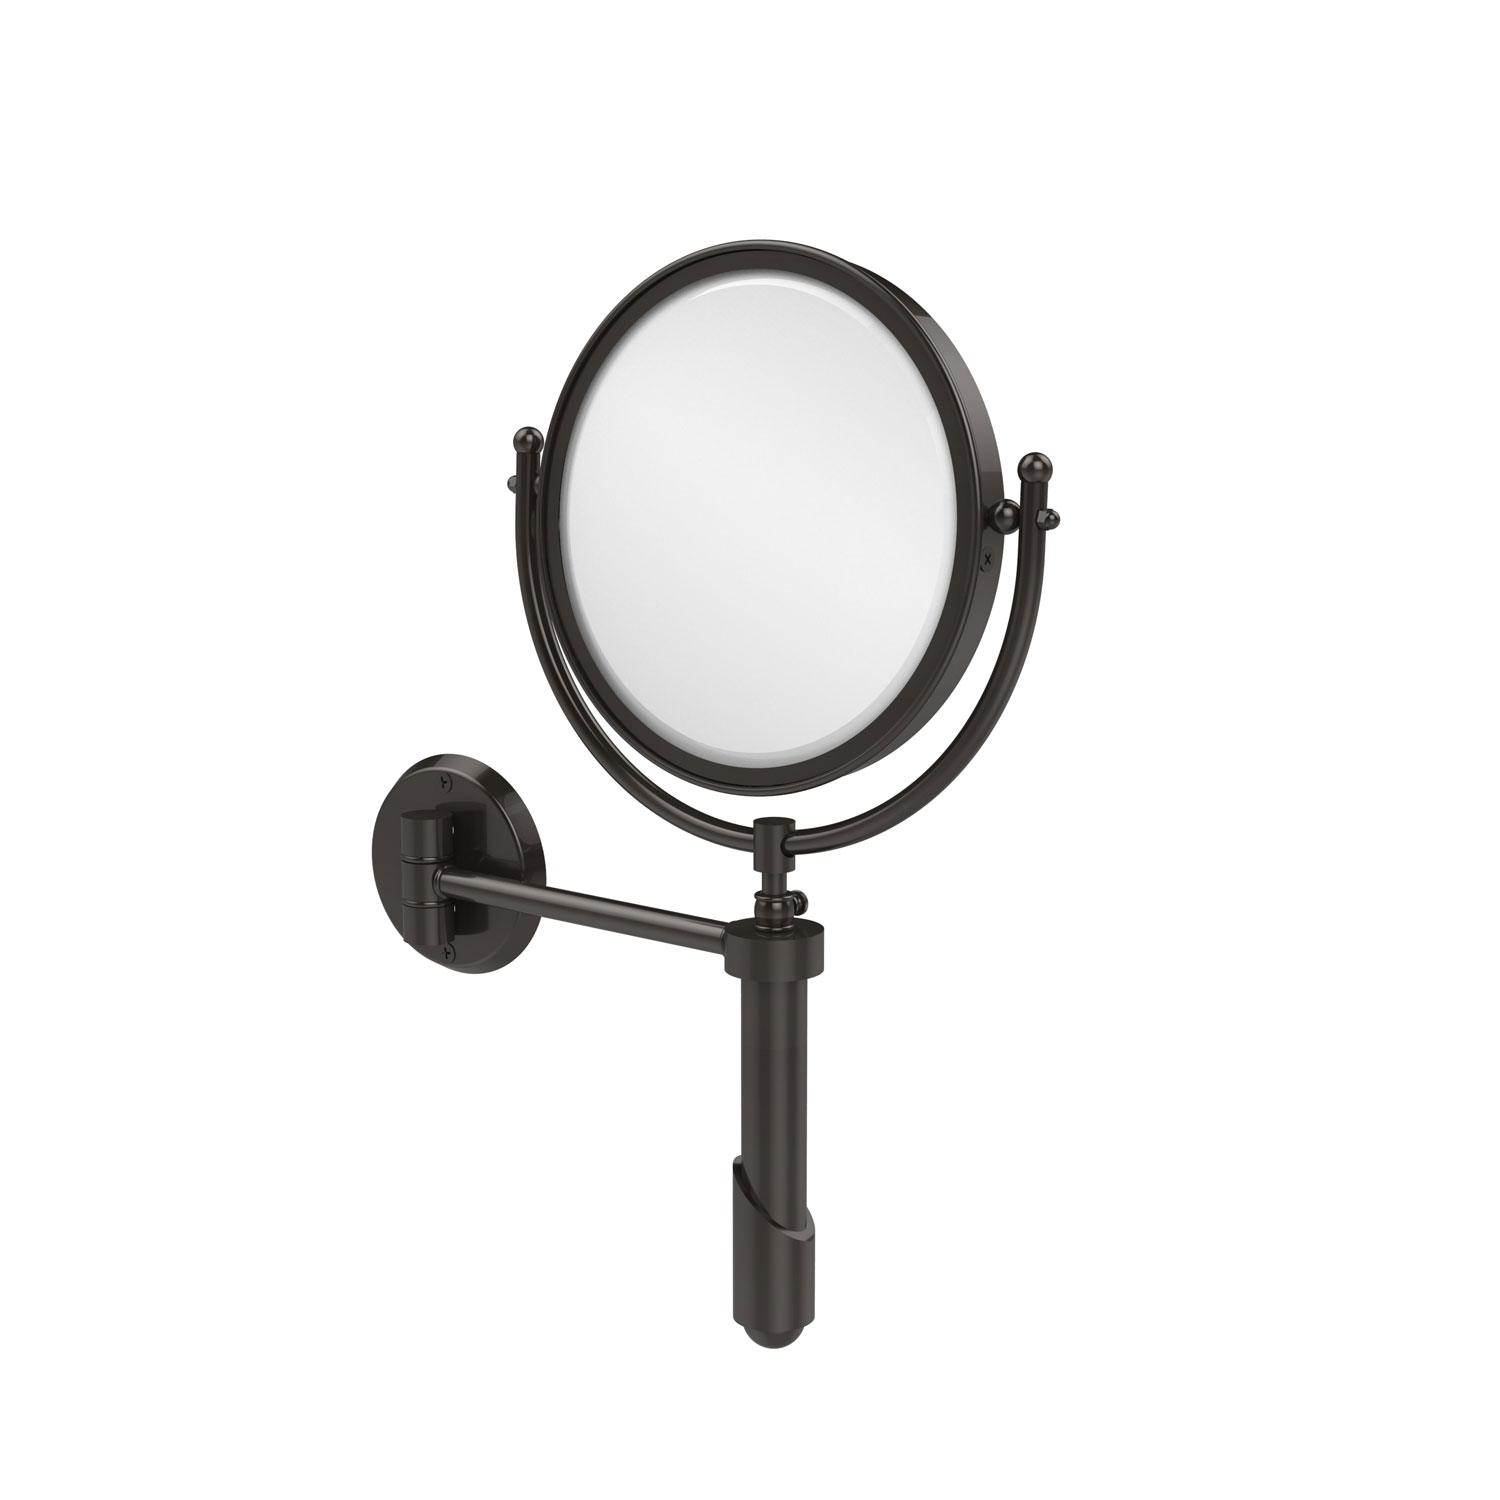 Soho Collection Wall Mounted Make-Up Mirror 8 Inch Diameter With 3X Magnification, Oil Rubbed Bronze